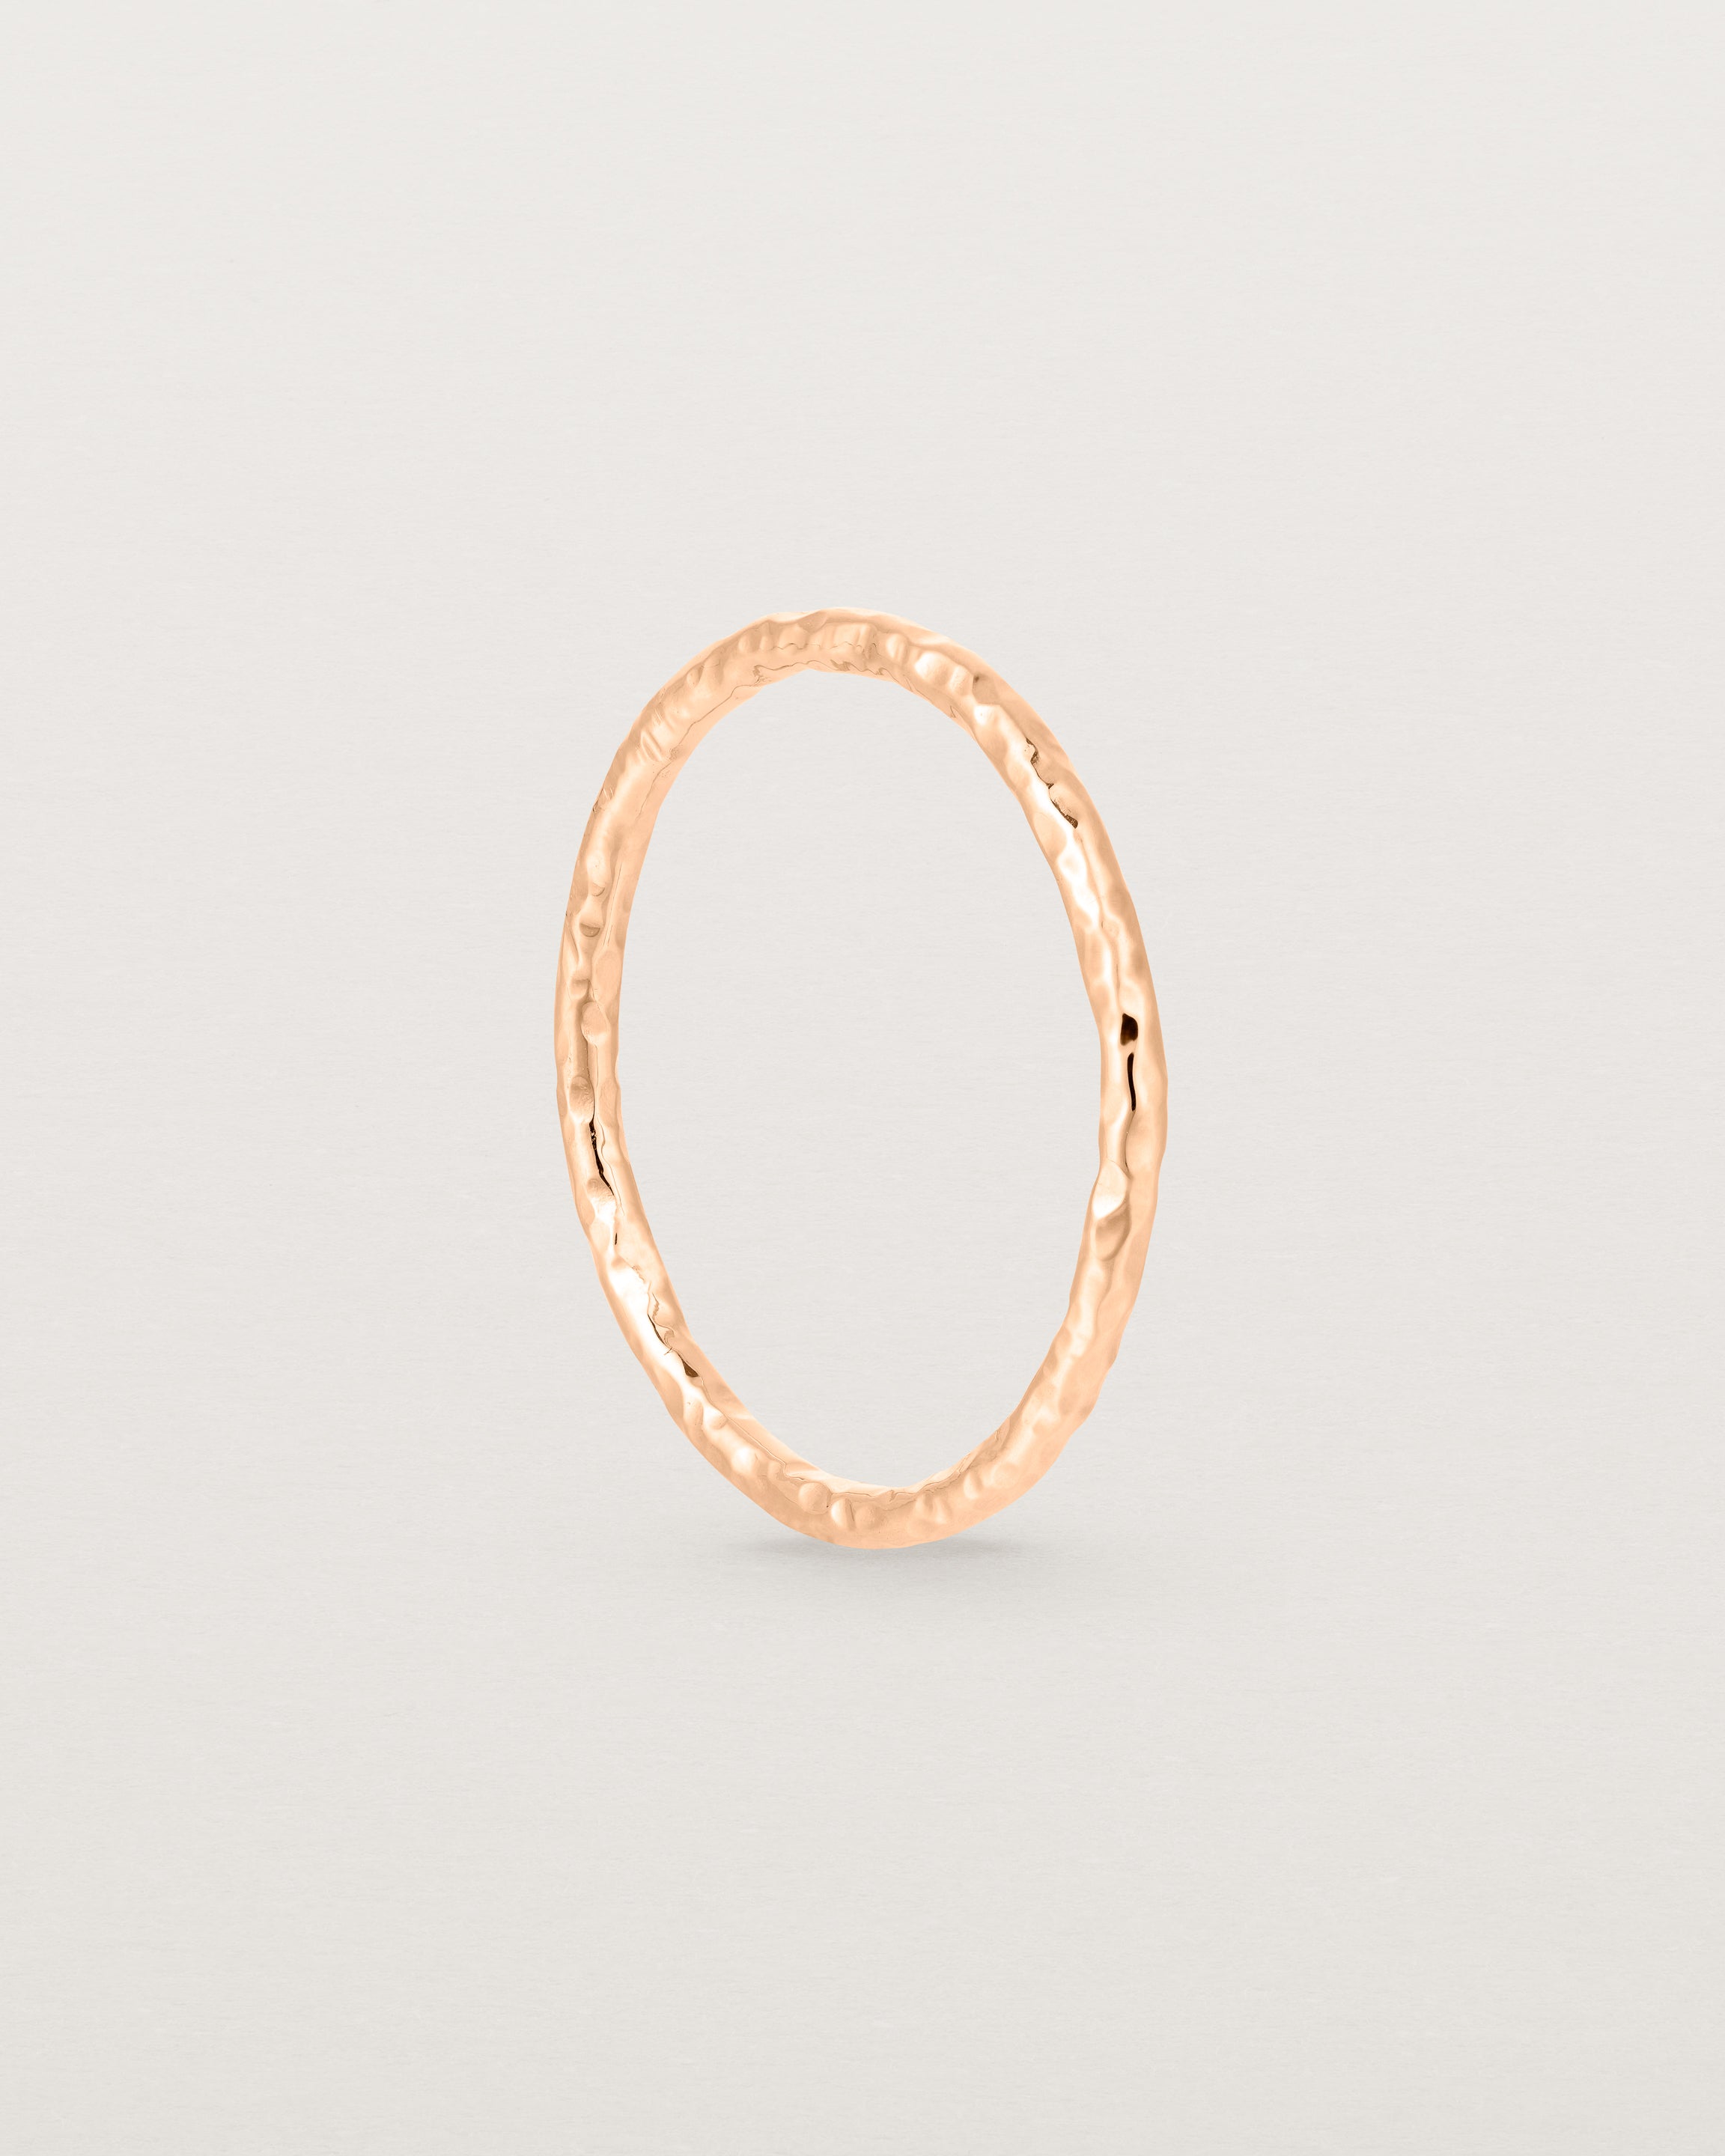 Standing view of the Faceted Wedding Ring in Rose Gold.